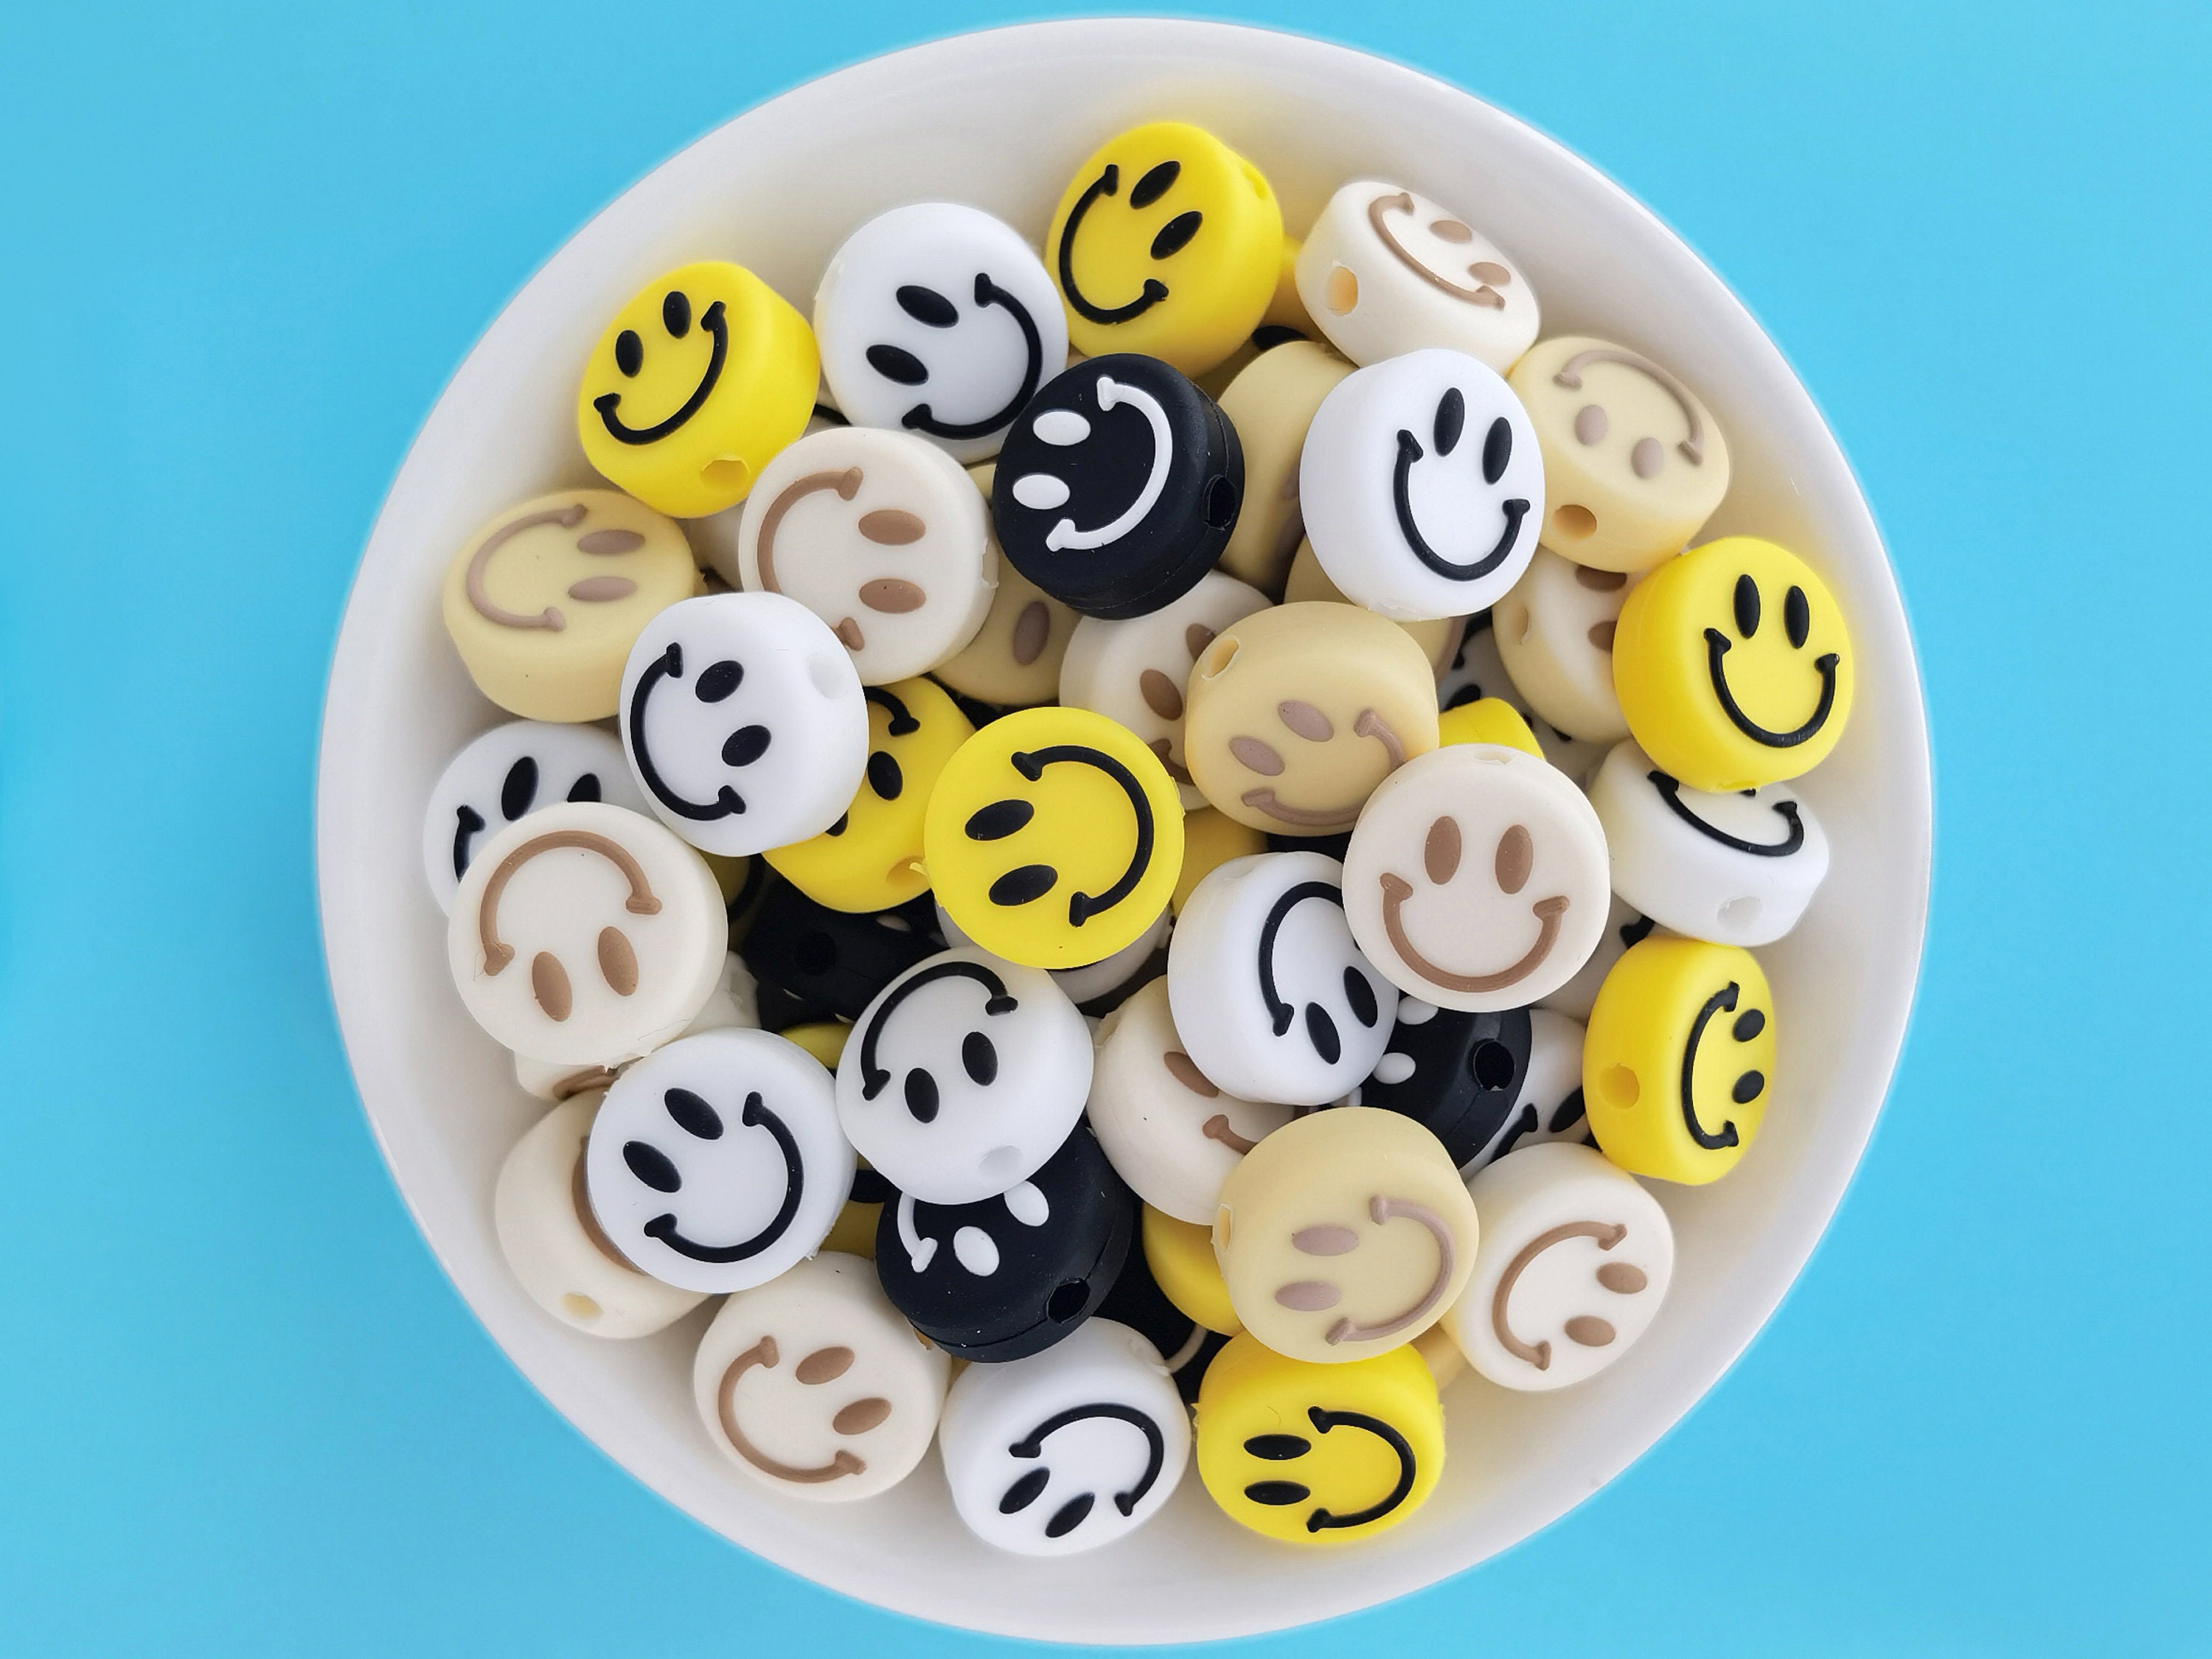 4600pcs Polymer Clay Beads for Bracelets Making Kit Crafts for Girls Ages 8-12  Beads for Jewelry Making With Charms Kit Smiley Face Beads 